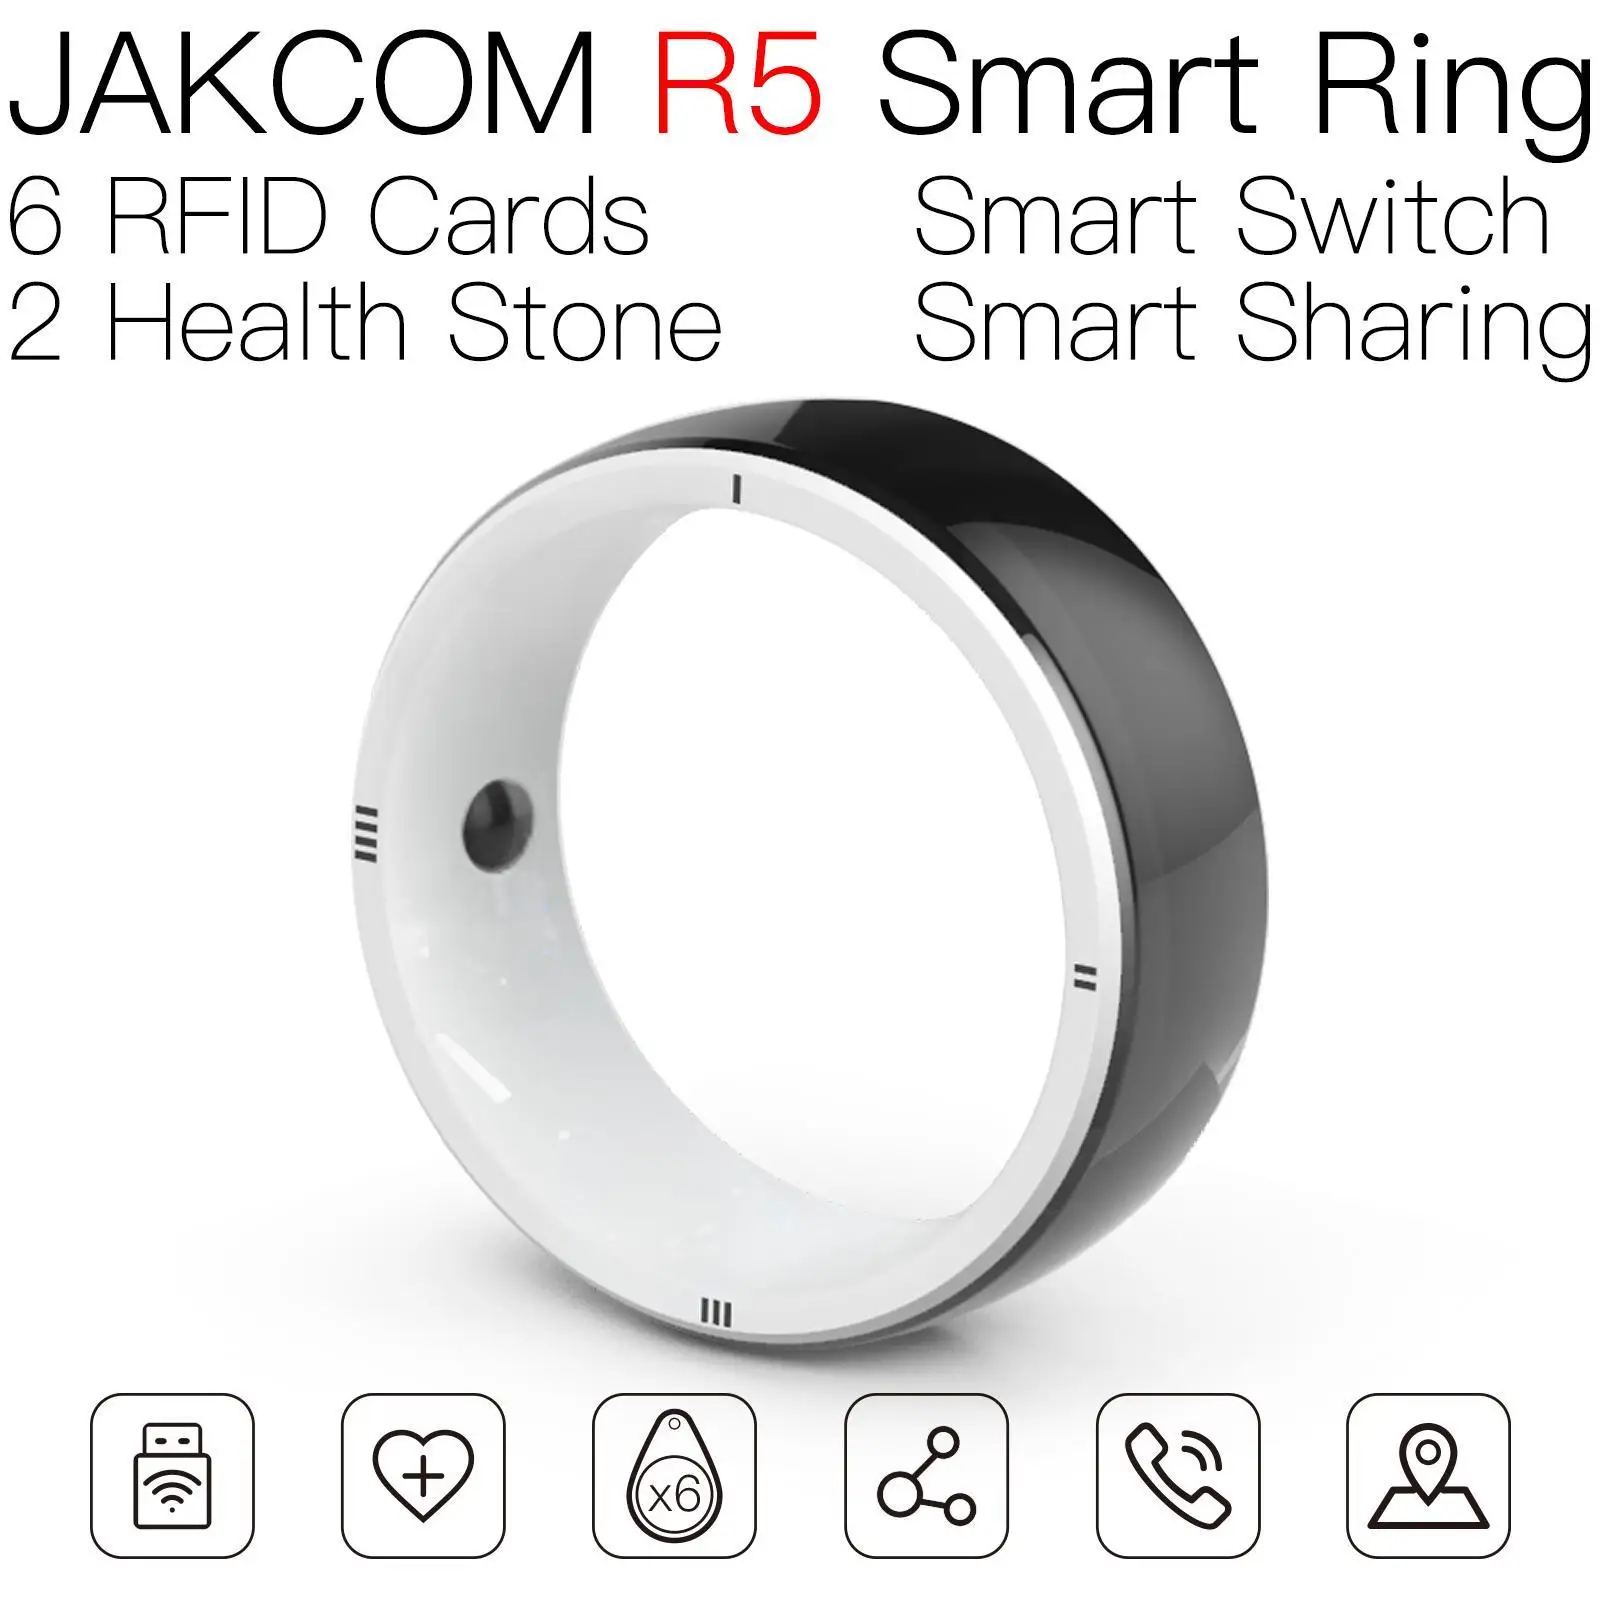 

JAKCOM R5 Smart Ring Nice than rfid ic2 schmuck acnh switch games oblong 13 56mhz tag uid changeable rc522 nfc module pelle